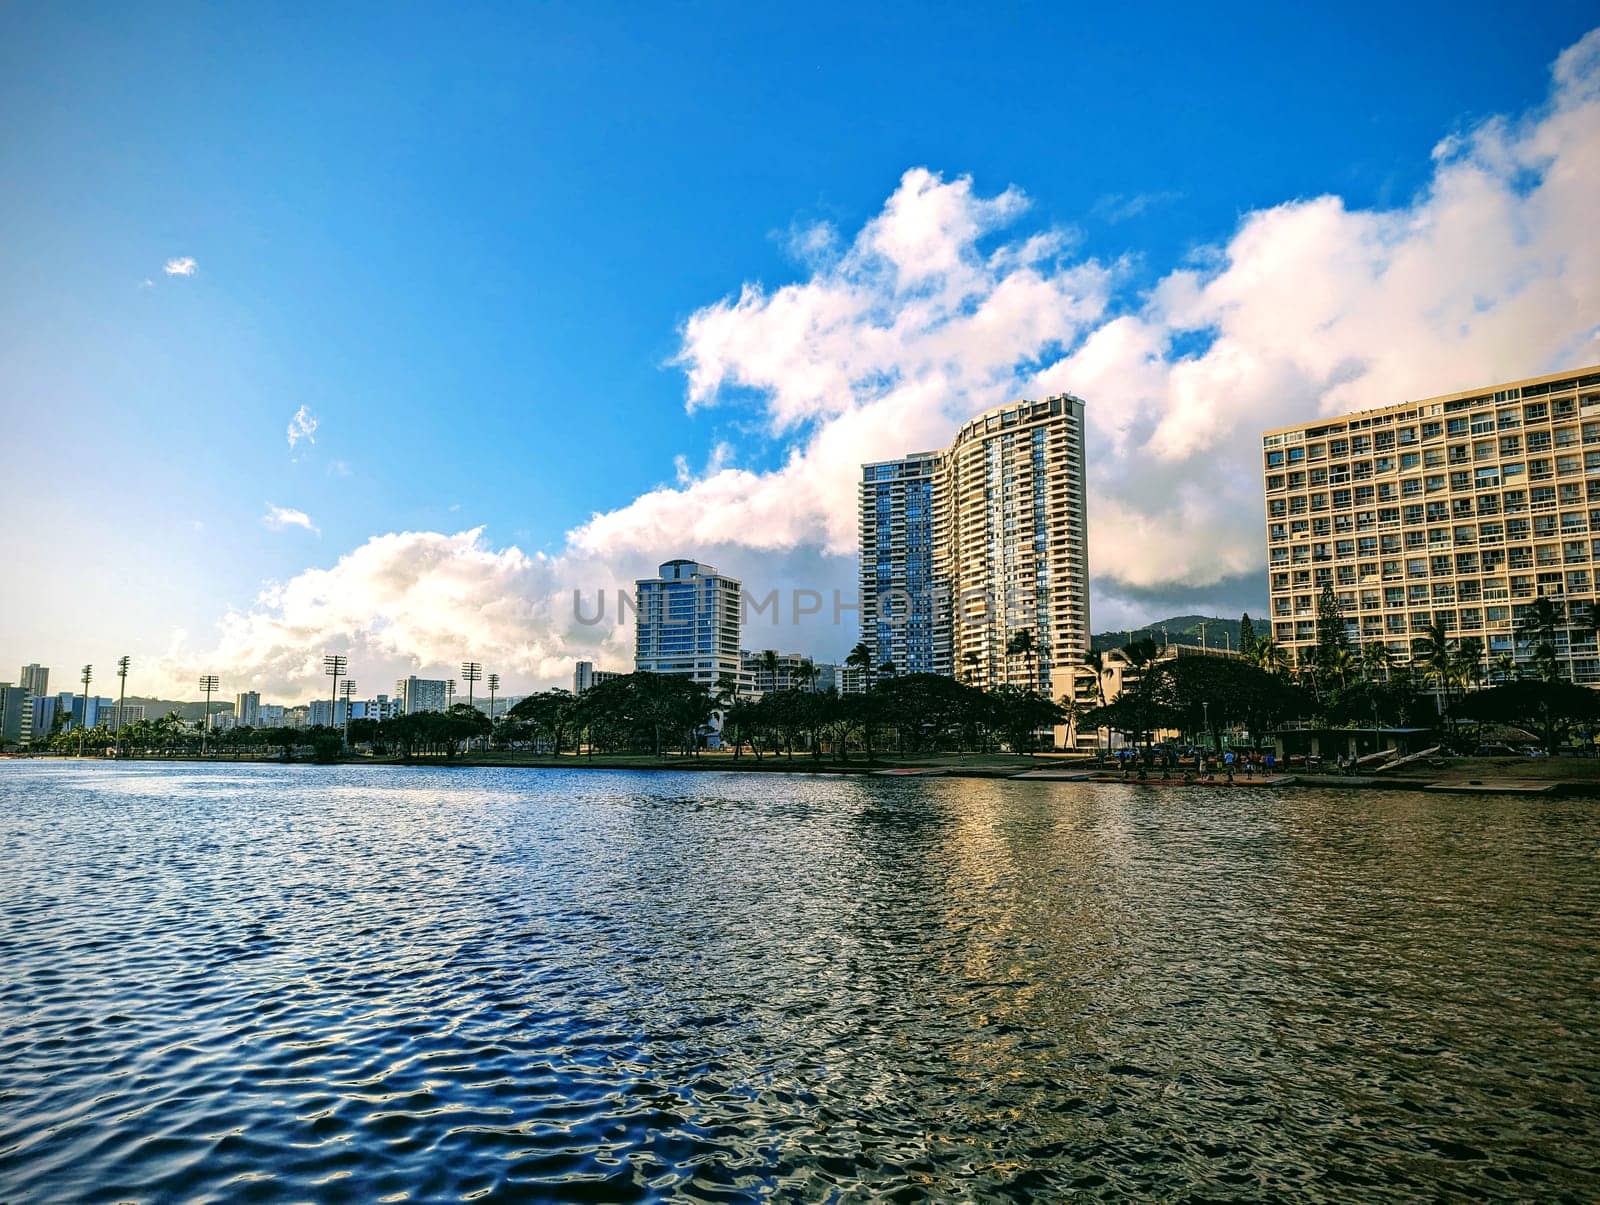 Serene banks of the Ala Wai Canal, an artificial waterway in Honolulu, Hawaii. The canal, stretching 1.5 miles (2.4 km), serves as the northern boundary of the vibrant Waikiki tourist district. Against a backdrop of towering buildings, the canal’s tranquil waters mirror the sky, creating a harmonious blend of urban and natural elements. The fluffy clouds overhead seem to float effortlessly, mirroring the peaceful ripples below. As the sun sets, the city lights begin to twinkle, casting a warm glow on the water’s surface. Whether you’re a local seeking a moment of respite or a visitor capturing memories, the Ala Wai Canal offers a quiet oasis amidst the bustling cityscape.